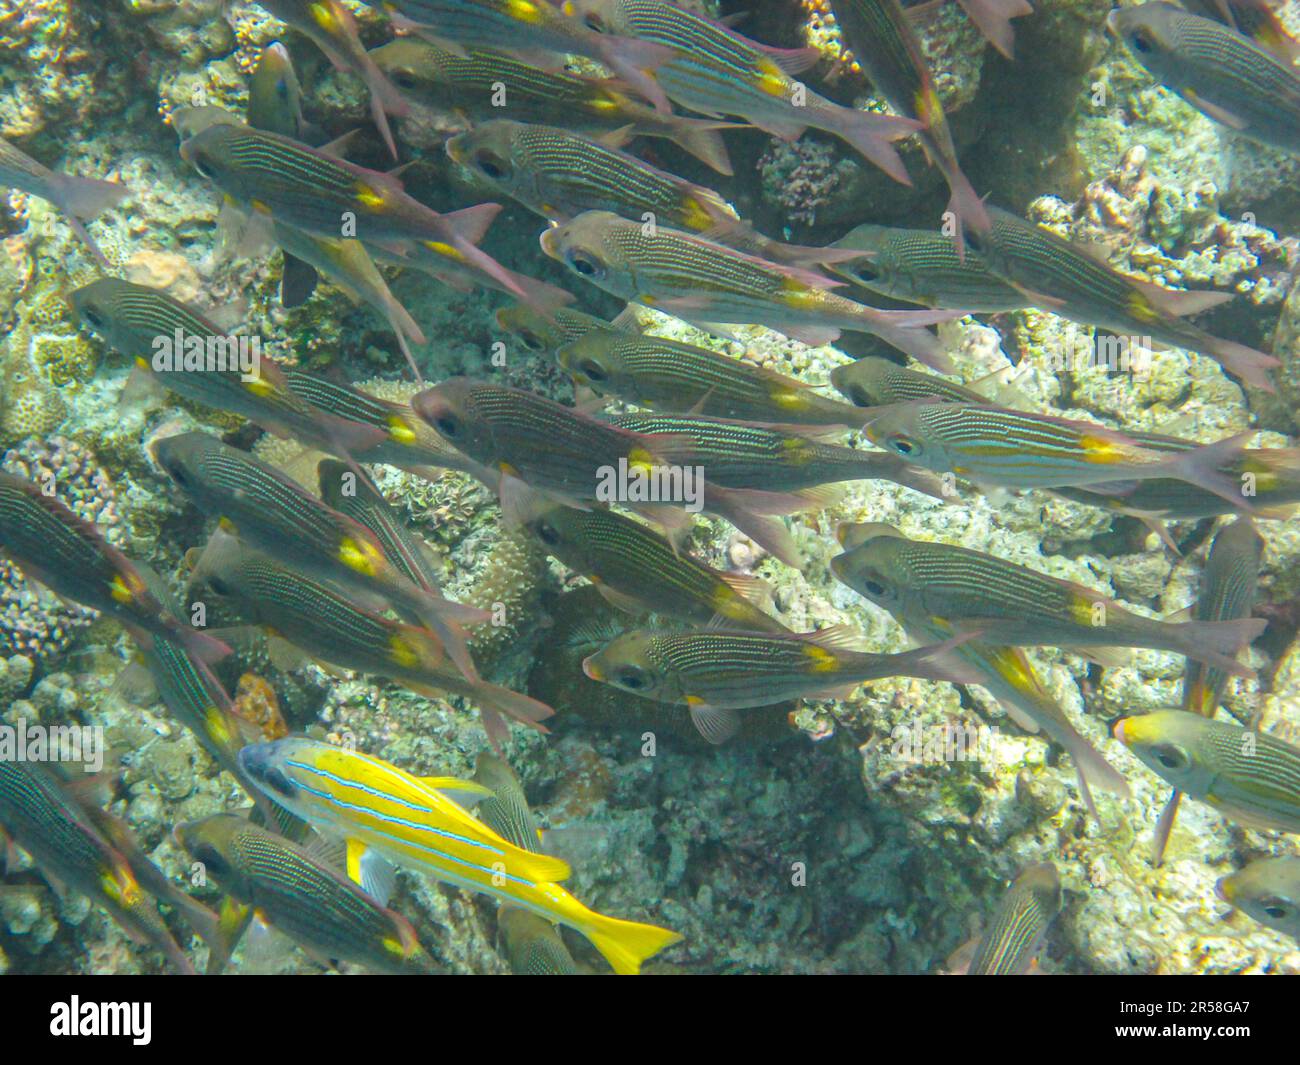 Close-up of School of Bluelined Snappers (Lutjanus Kasmira). School of blue stripe snapper going in one direction Stock Photo